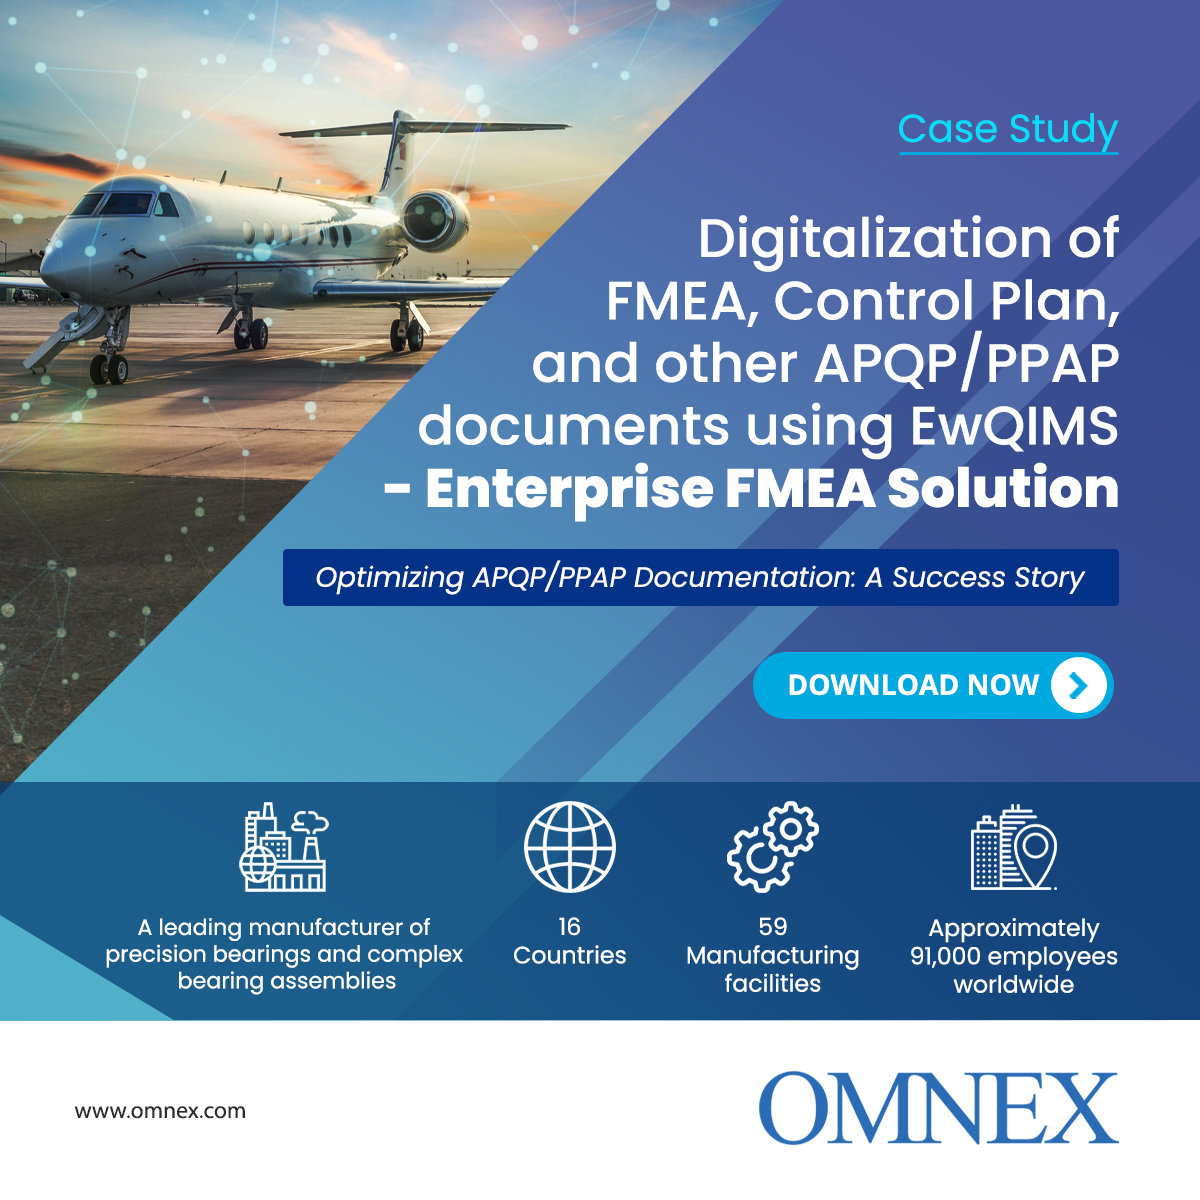 Discover how a global leader in high-precision bearings overcame APQP/PPAP documentation challenges with Omnex Systems' Enterprise FMEA Software. 
Learn More:
hubs.li/Q02sFZ2d0

#DigitalFMEA #EwQIMS #APQP #PPAP #QualityManagement #EnterpriseSolutions #ProcessImprovement